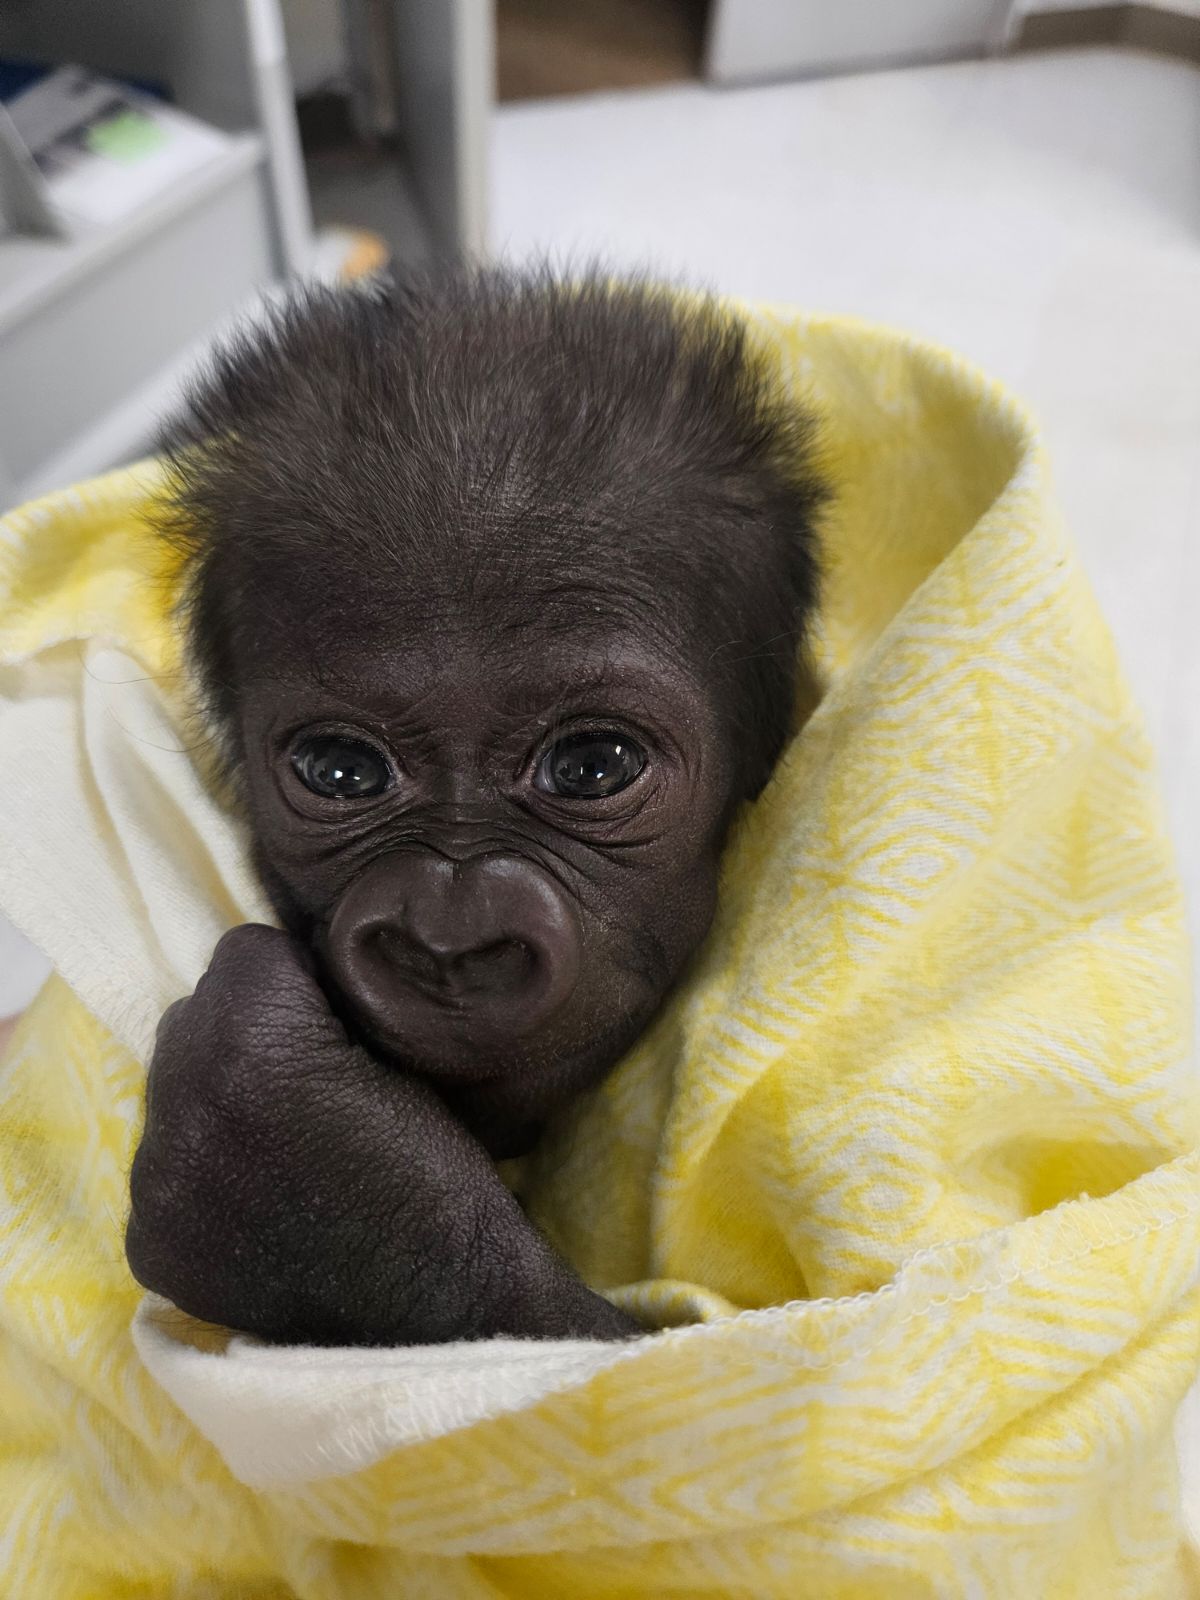 Bundle of fur: Baby gorilla shows head of thick, lustrous hair, Nature, News